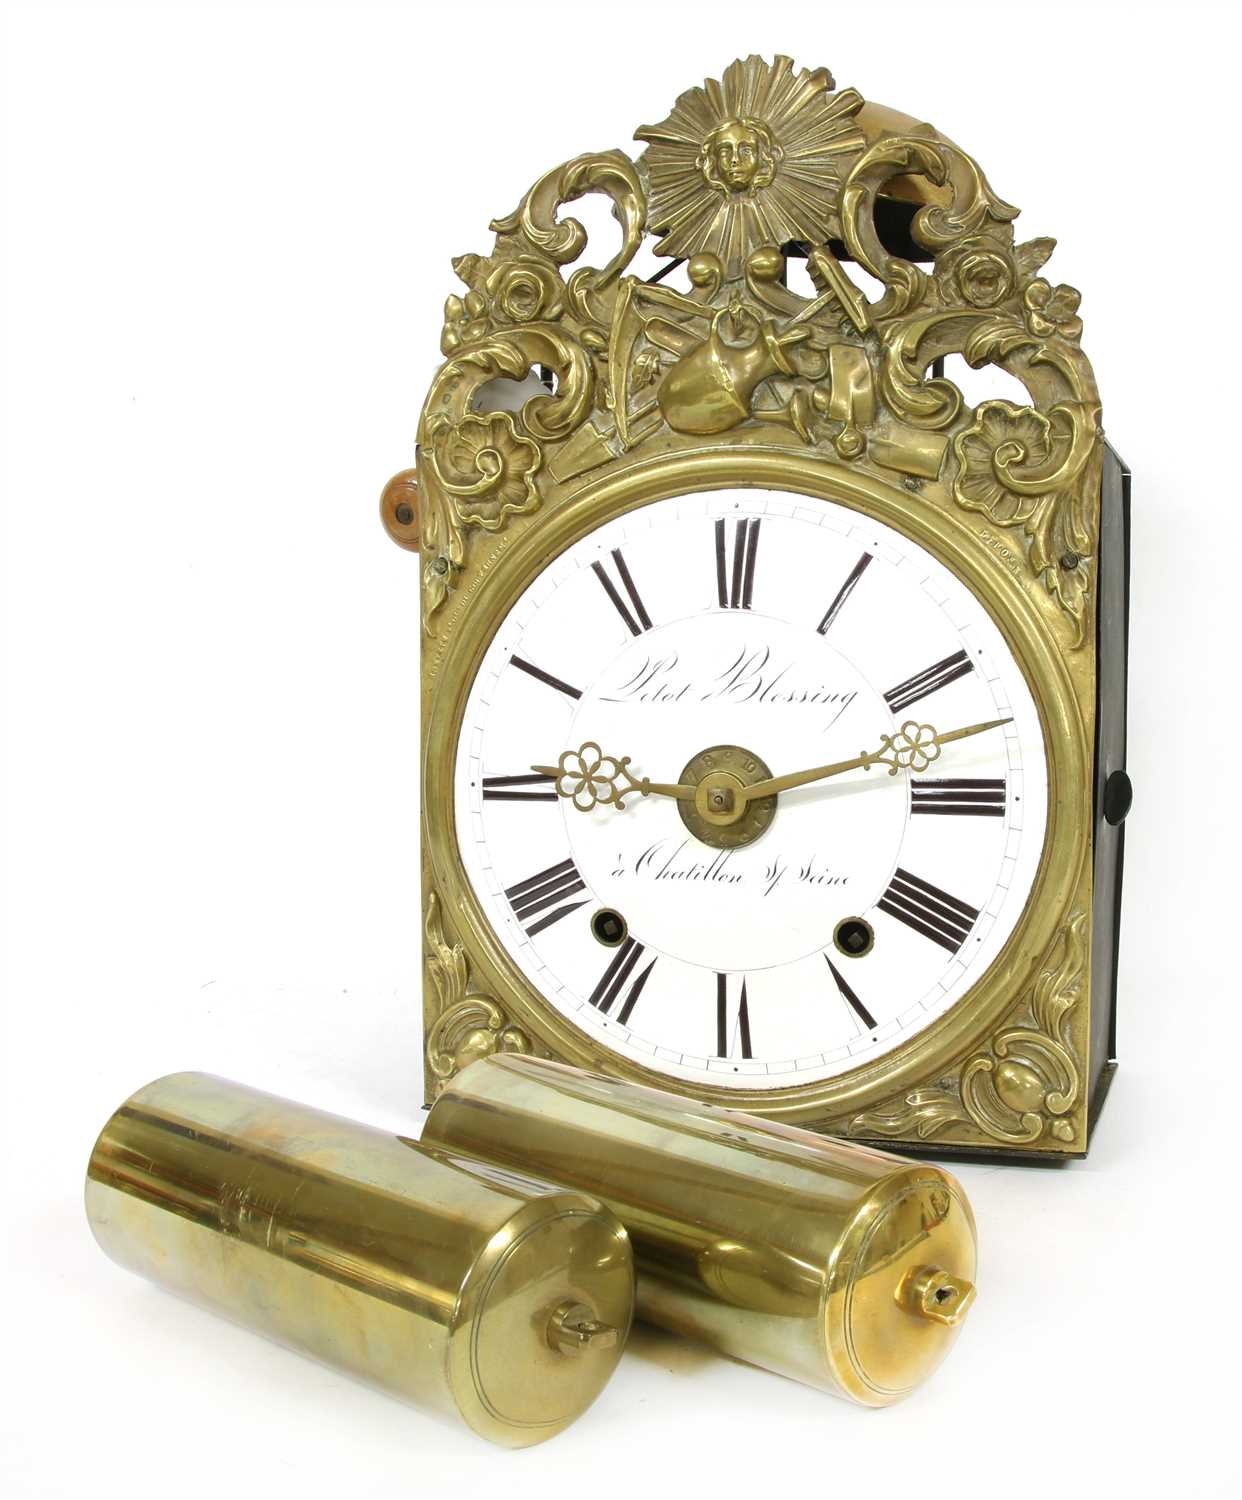 Lot 144 - A French Comtoise wall clock